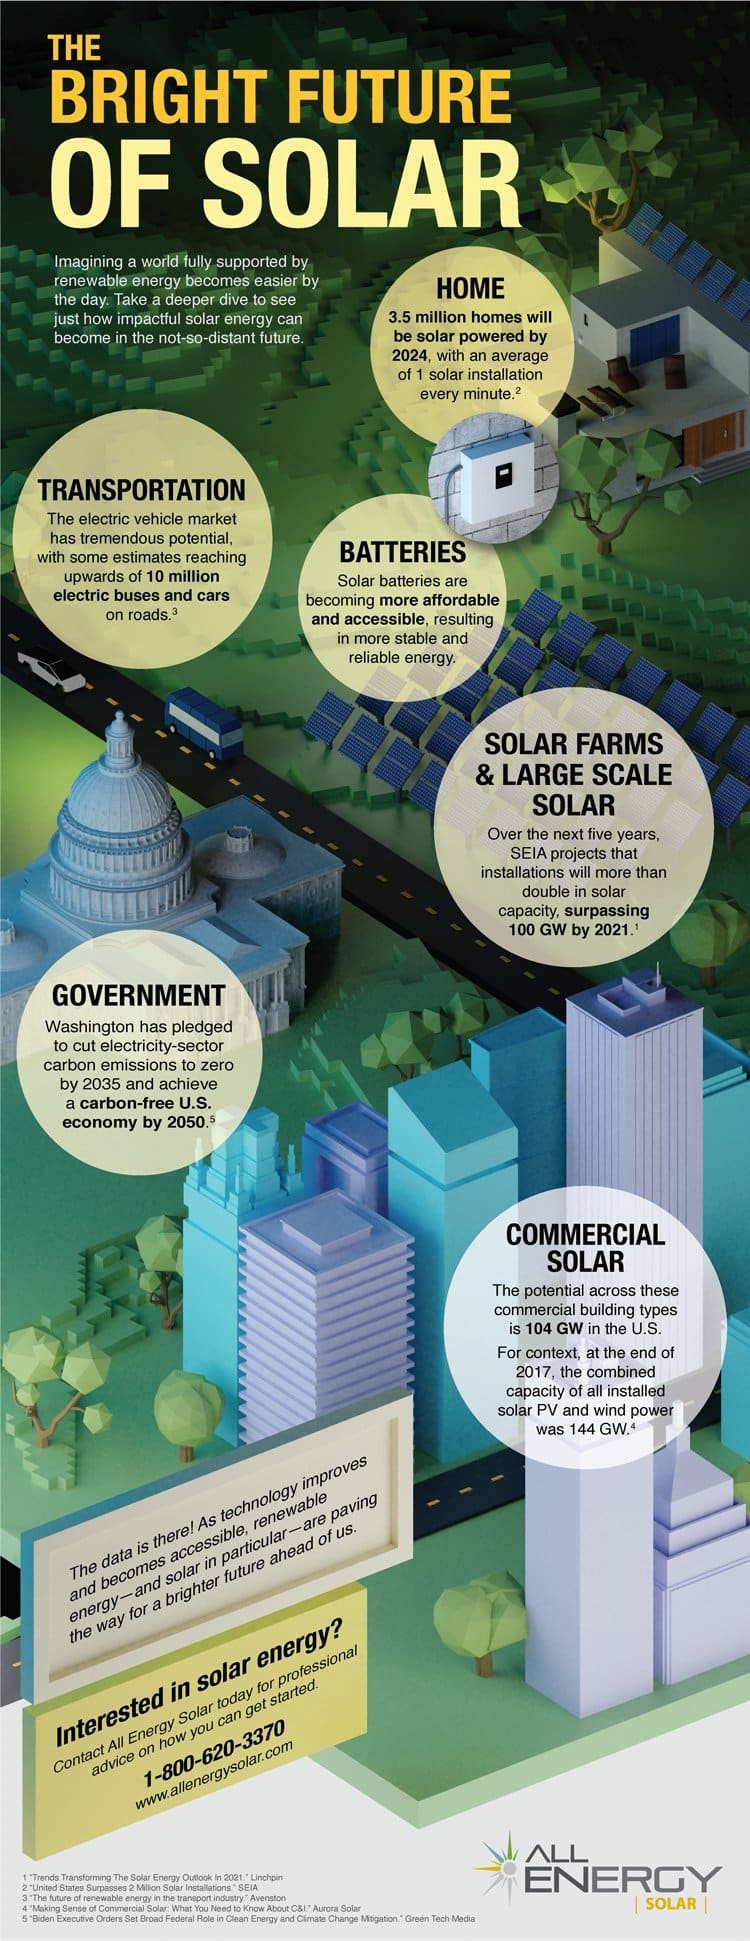 Infographic about the future of solar energy and the energy landscape